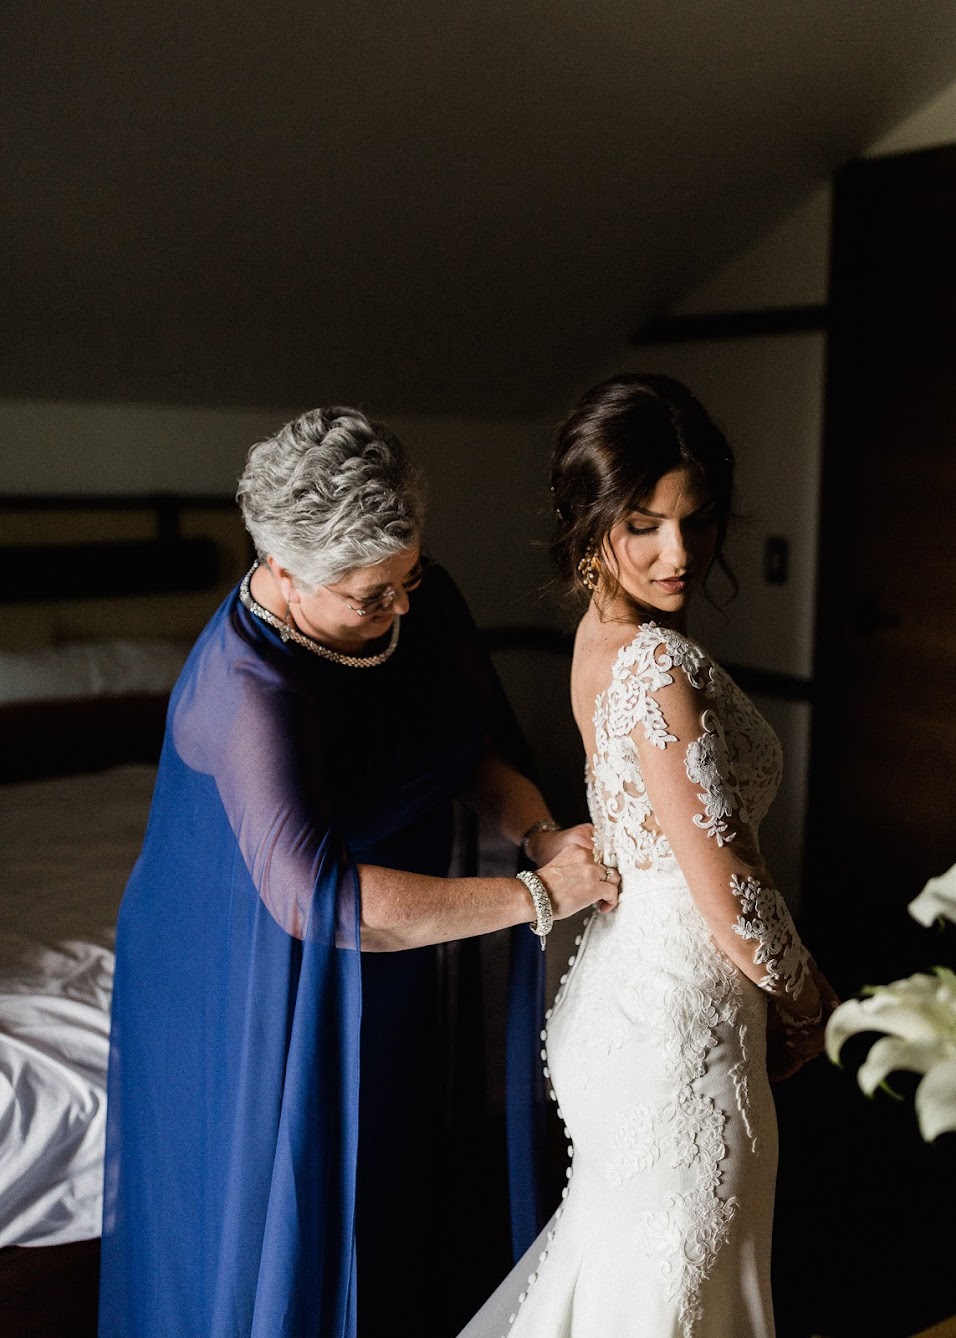 the bride standing in her dress while her mom helps her button it. The dress has buttons that go all the way down to the floor. 